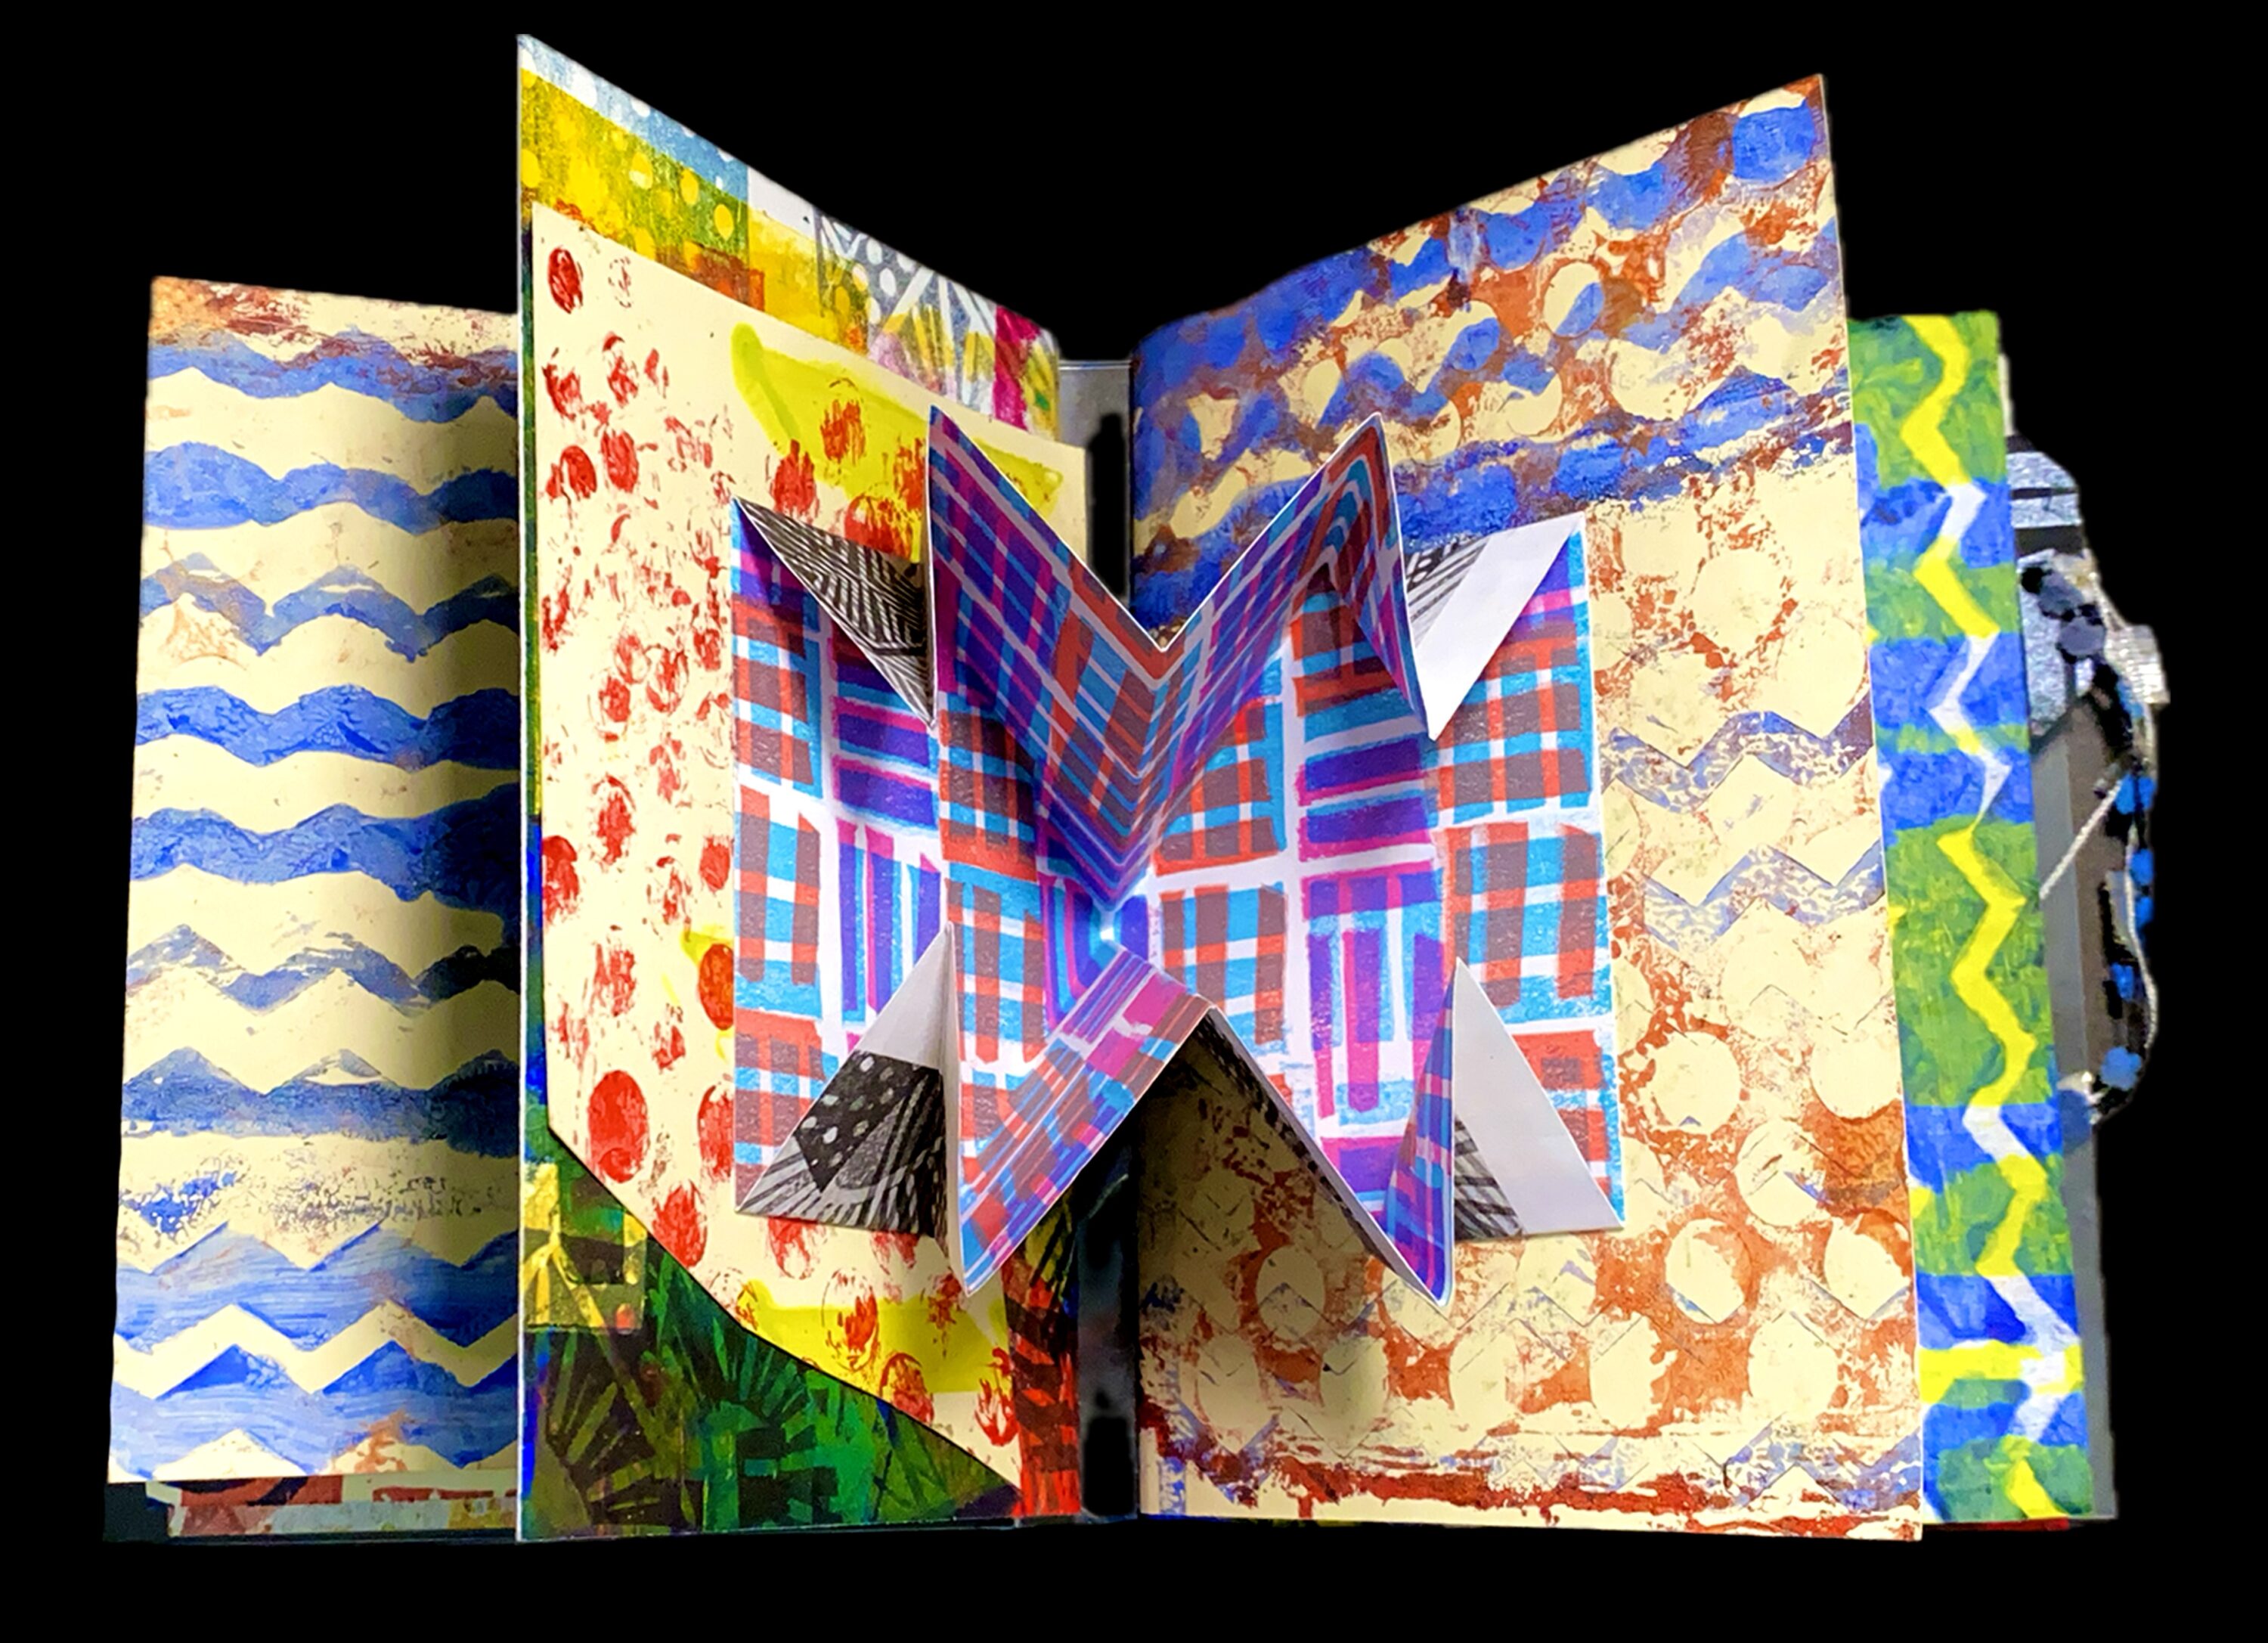 An open open book with a pop-up element in the center spread. Several pages of the book are visible, and each has a different, brightly patterned design printed on it.